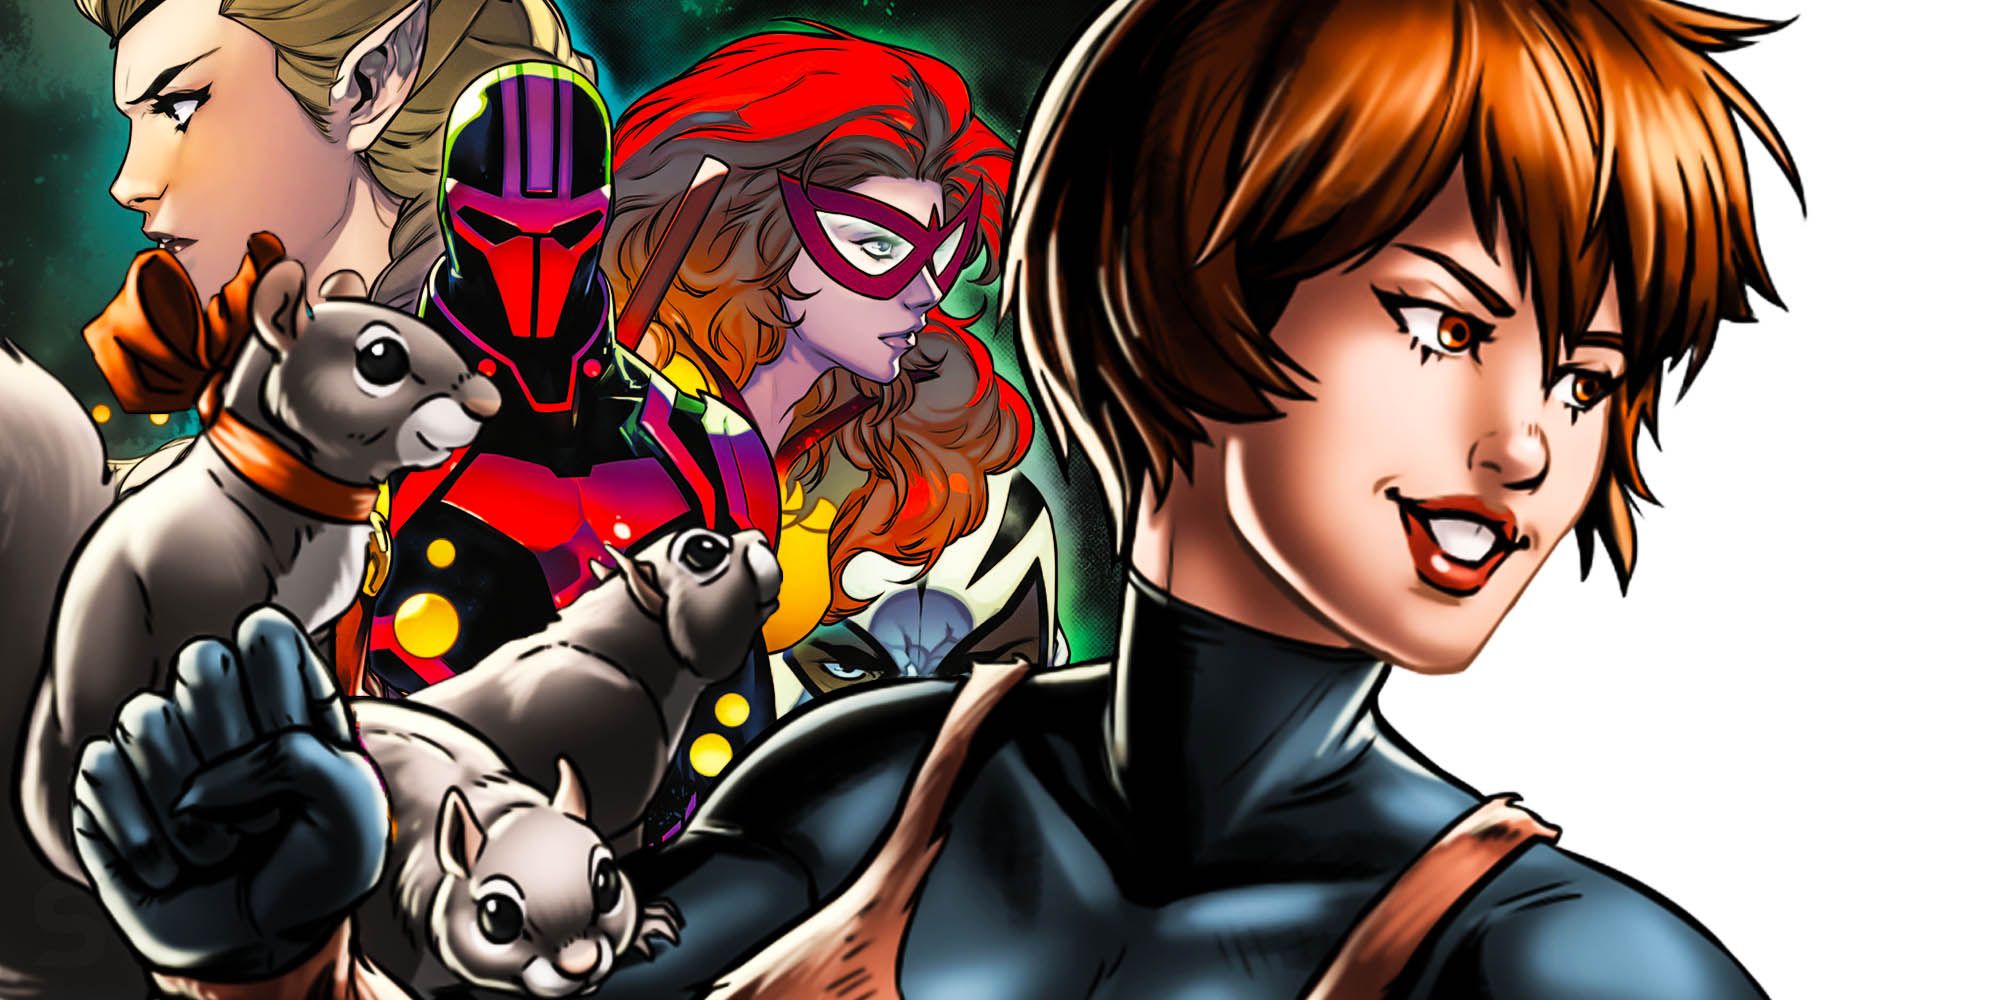 MCU revival of New Warriors and Squirrel girl